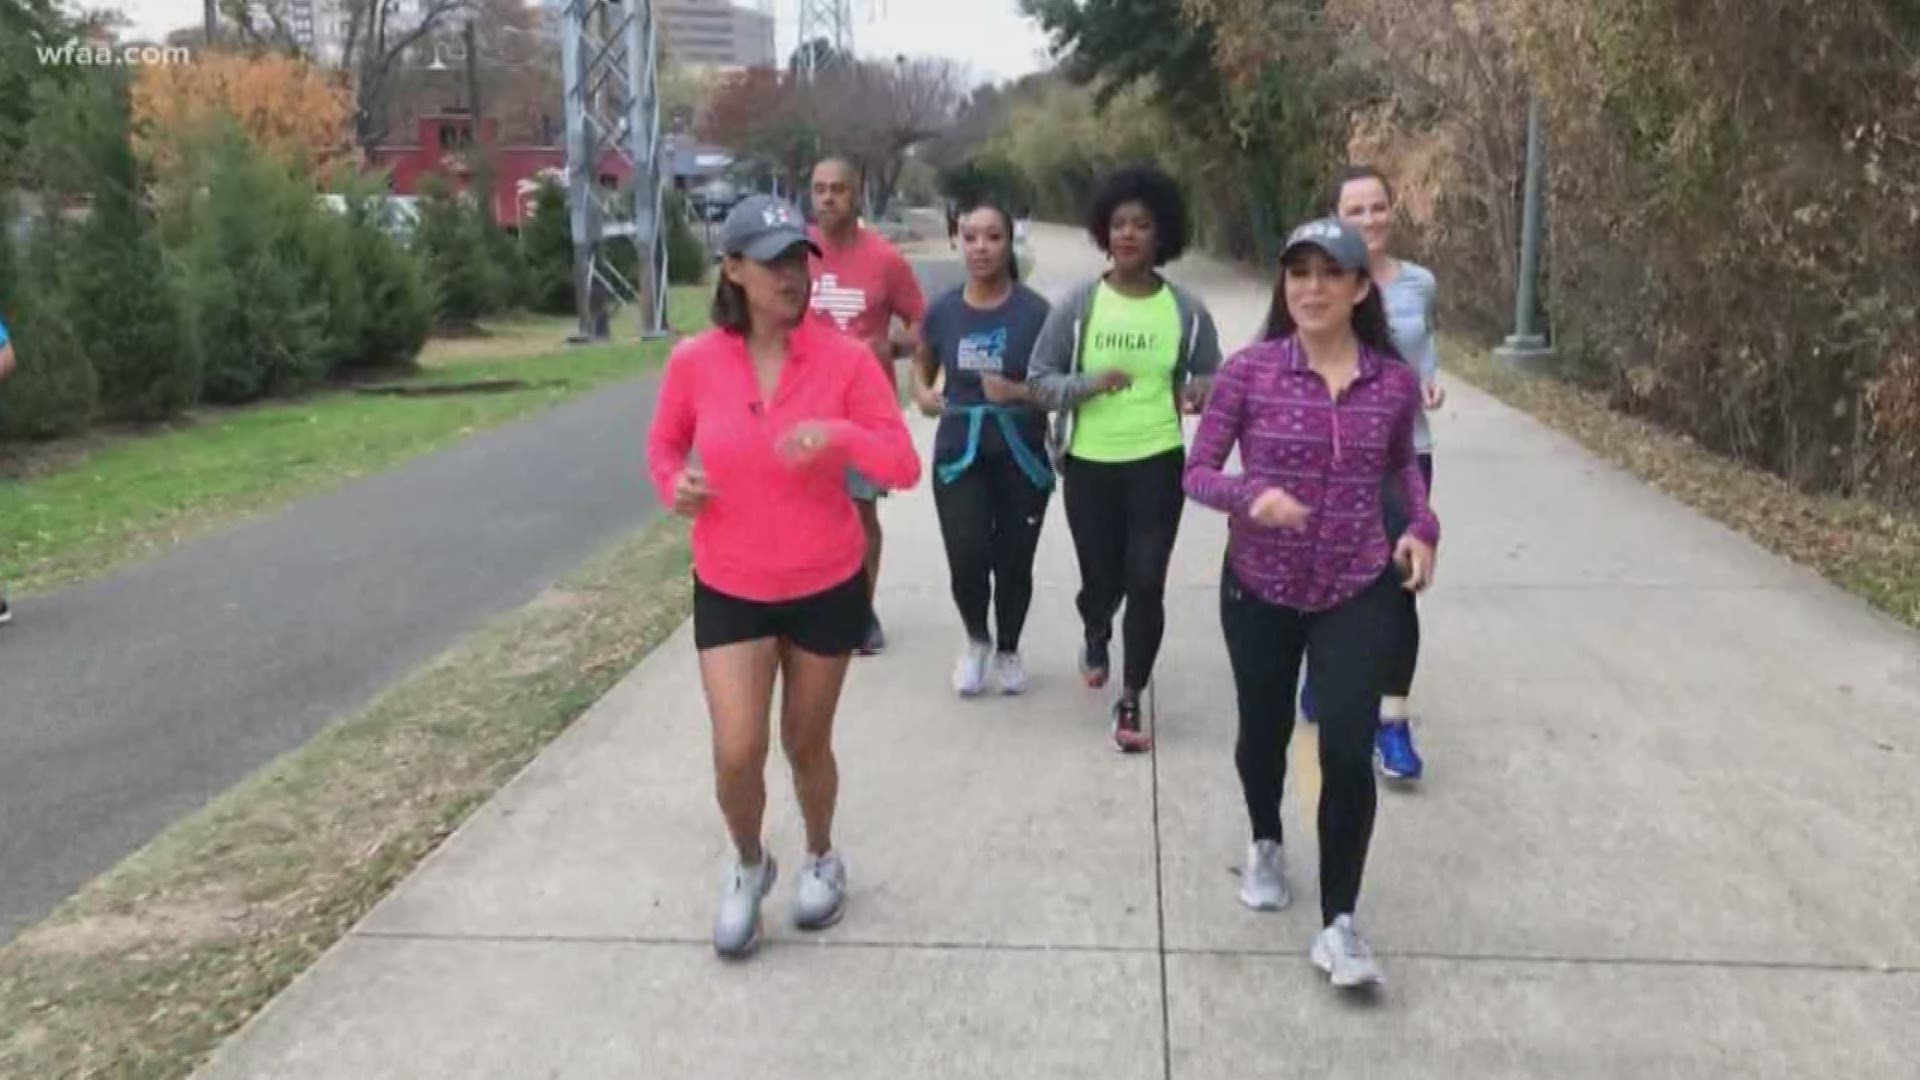 We took a look at why different members of the WFAA crew are running in this year's BMW Dallas Marathon.